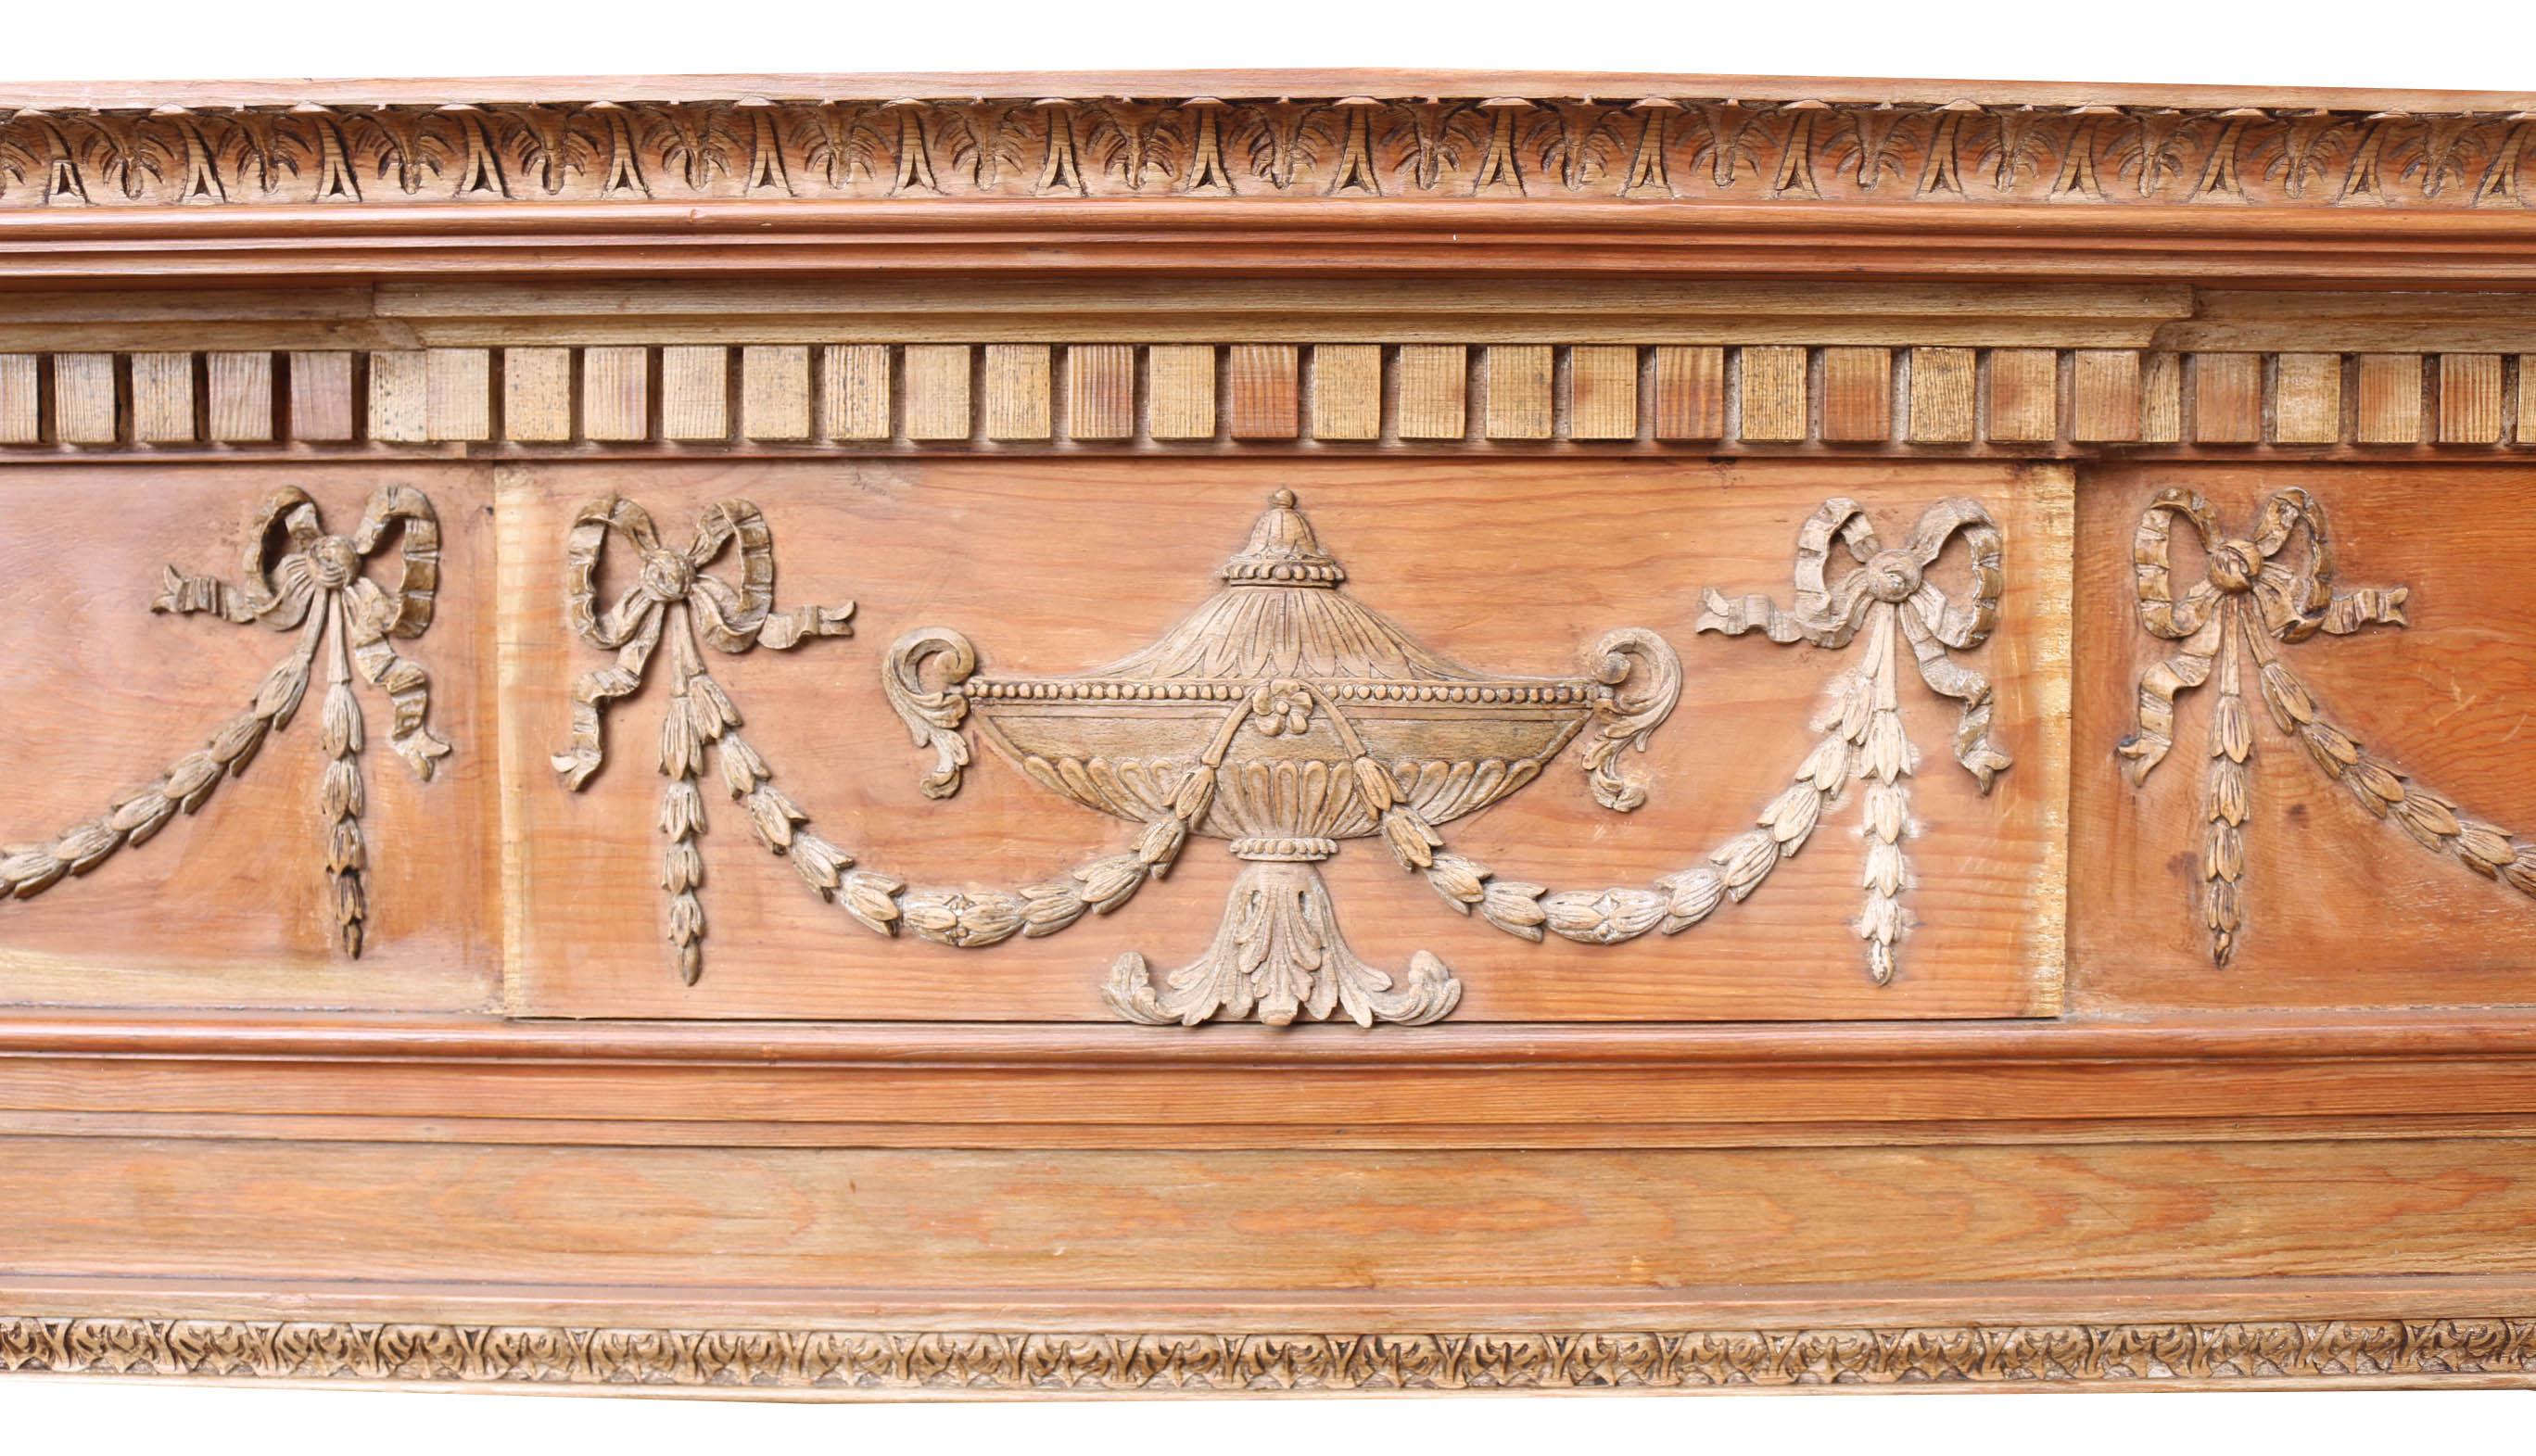 This fire surround is in very good condition. Hand-carved wooden decoration. 

Measures: Height 137 cm
Width 180 cm
Depth 22 cm
Opening height 99 cm
Opening width 118 cm
Width between legs 166 cm
Weight 23 kg.